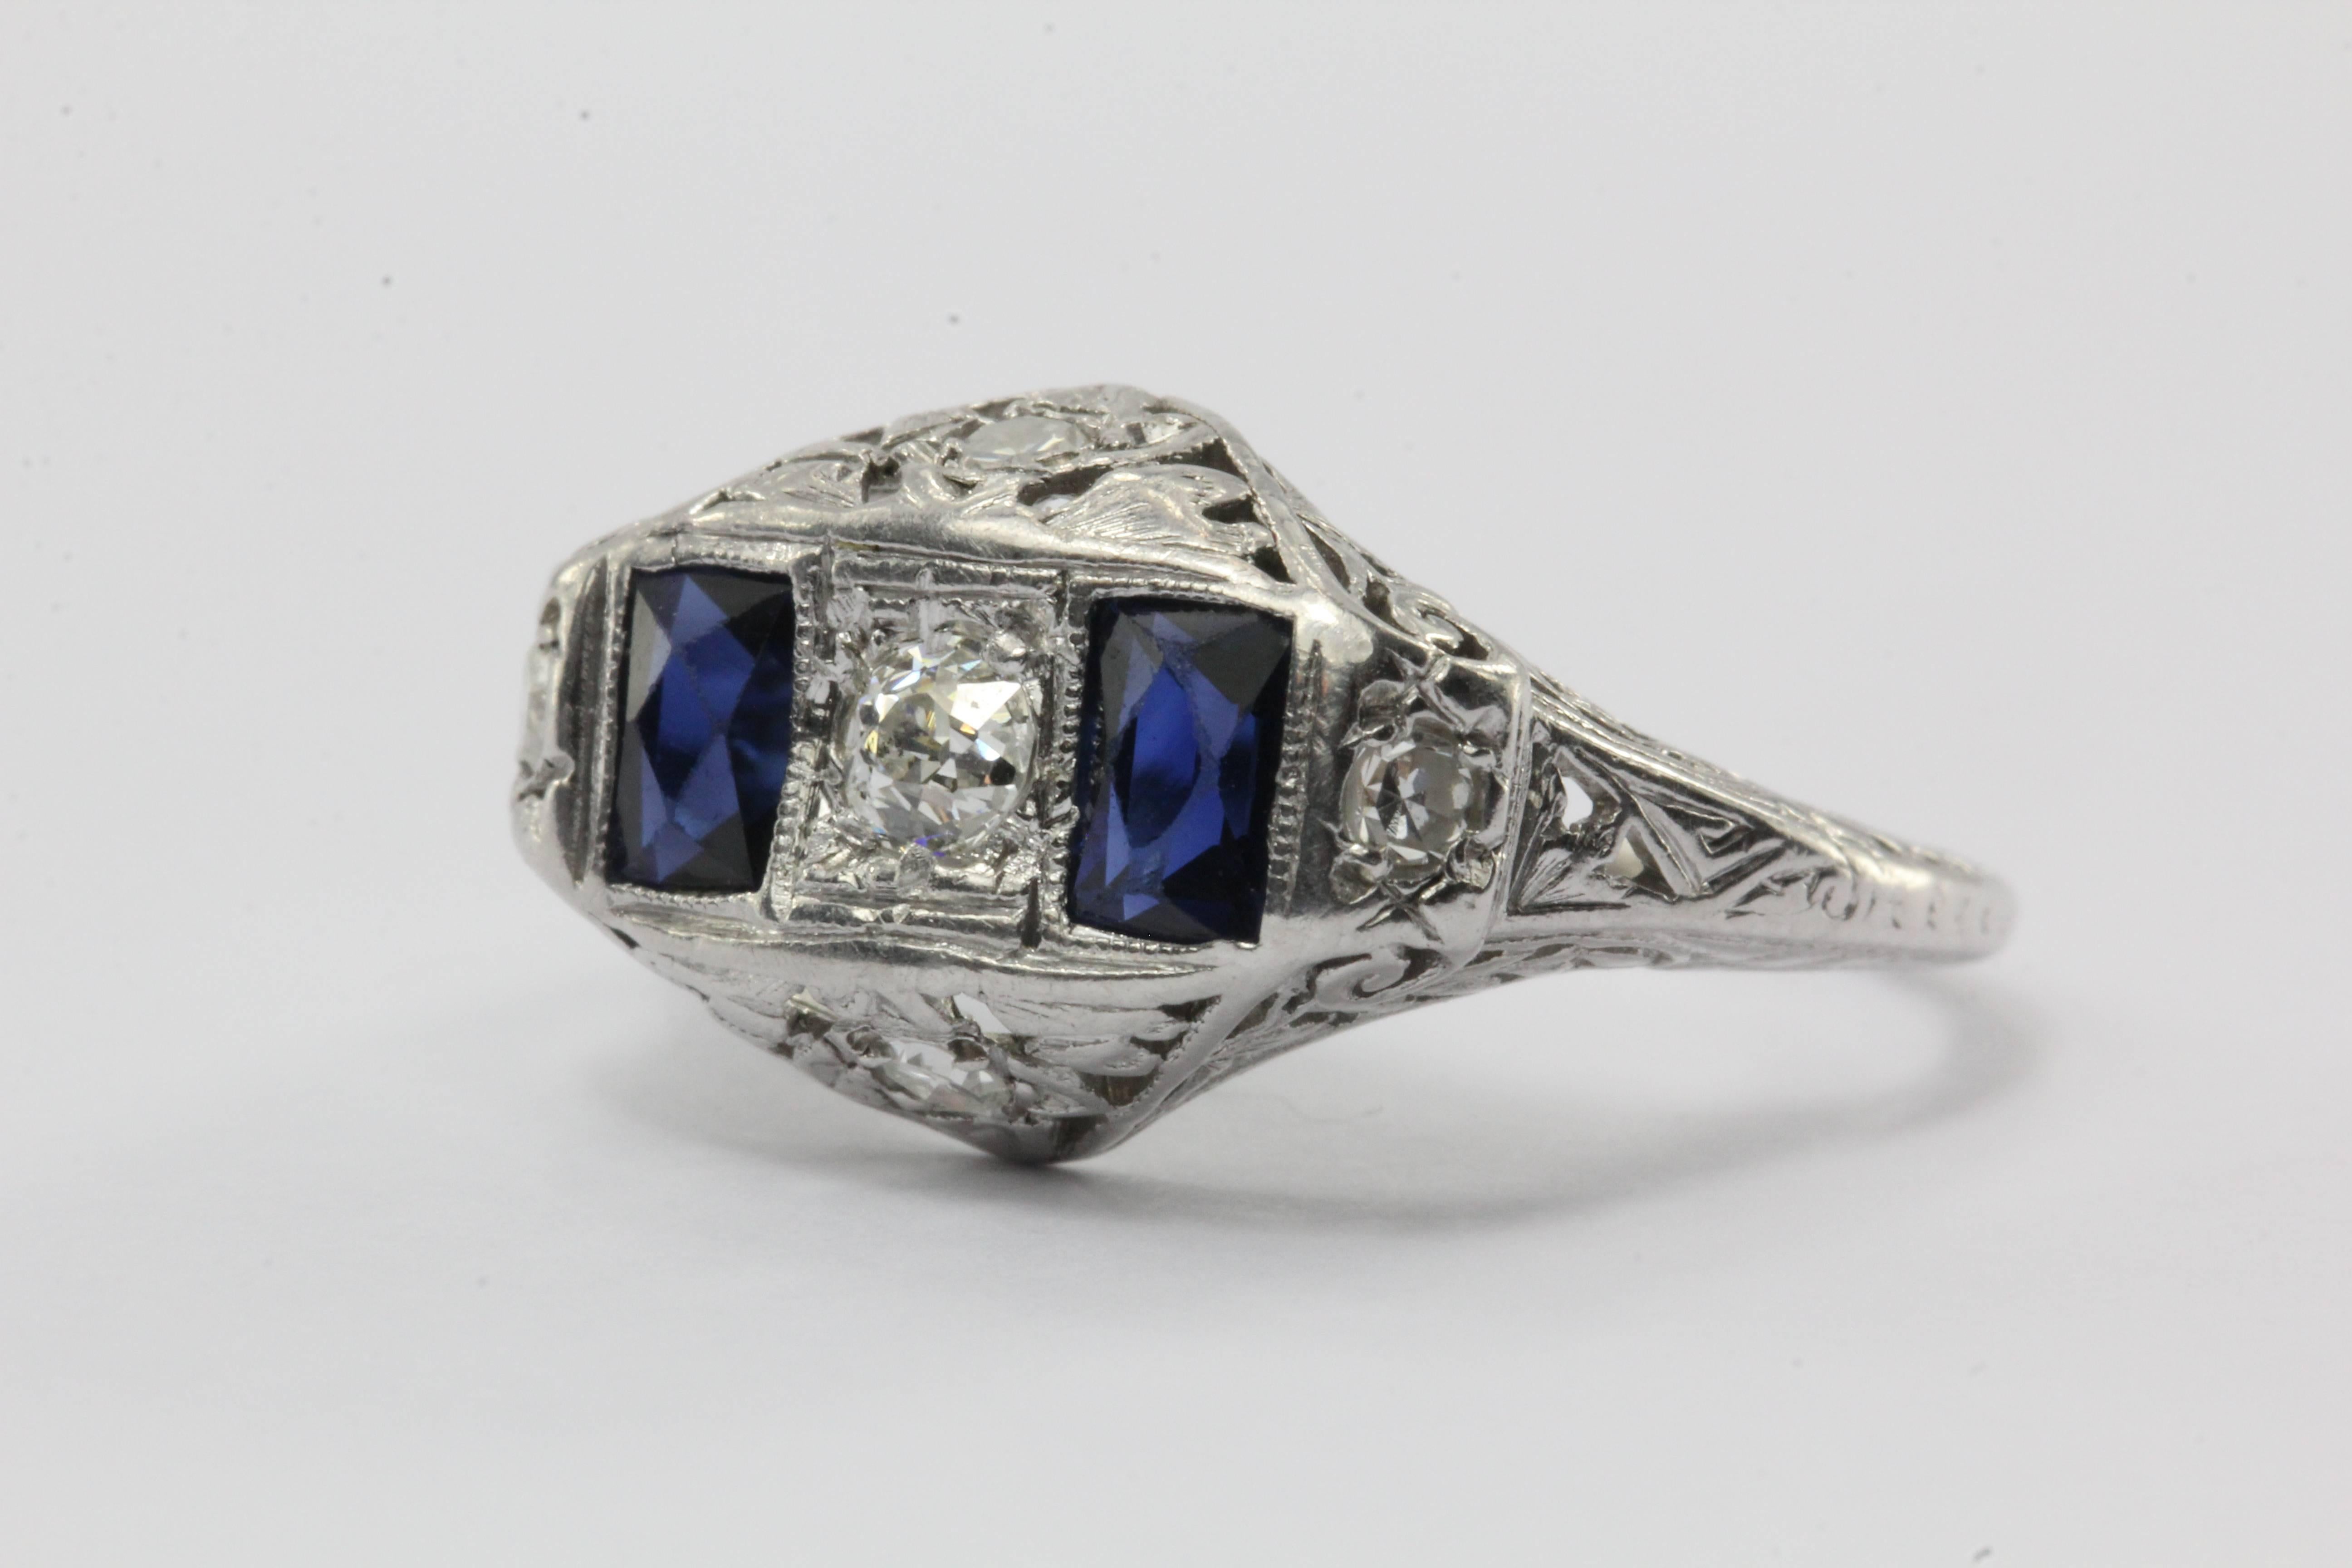 Antique Art Deco Platinum Old European Diamond & Sapphire Ring. The ring is in great antique condition and ready to wear. The ring is set with approximately .30 carats of G/H color, Si clarity old European cut diamonds and two .50 carat french cut